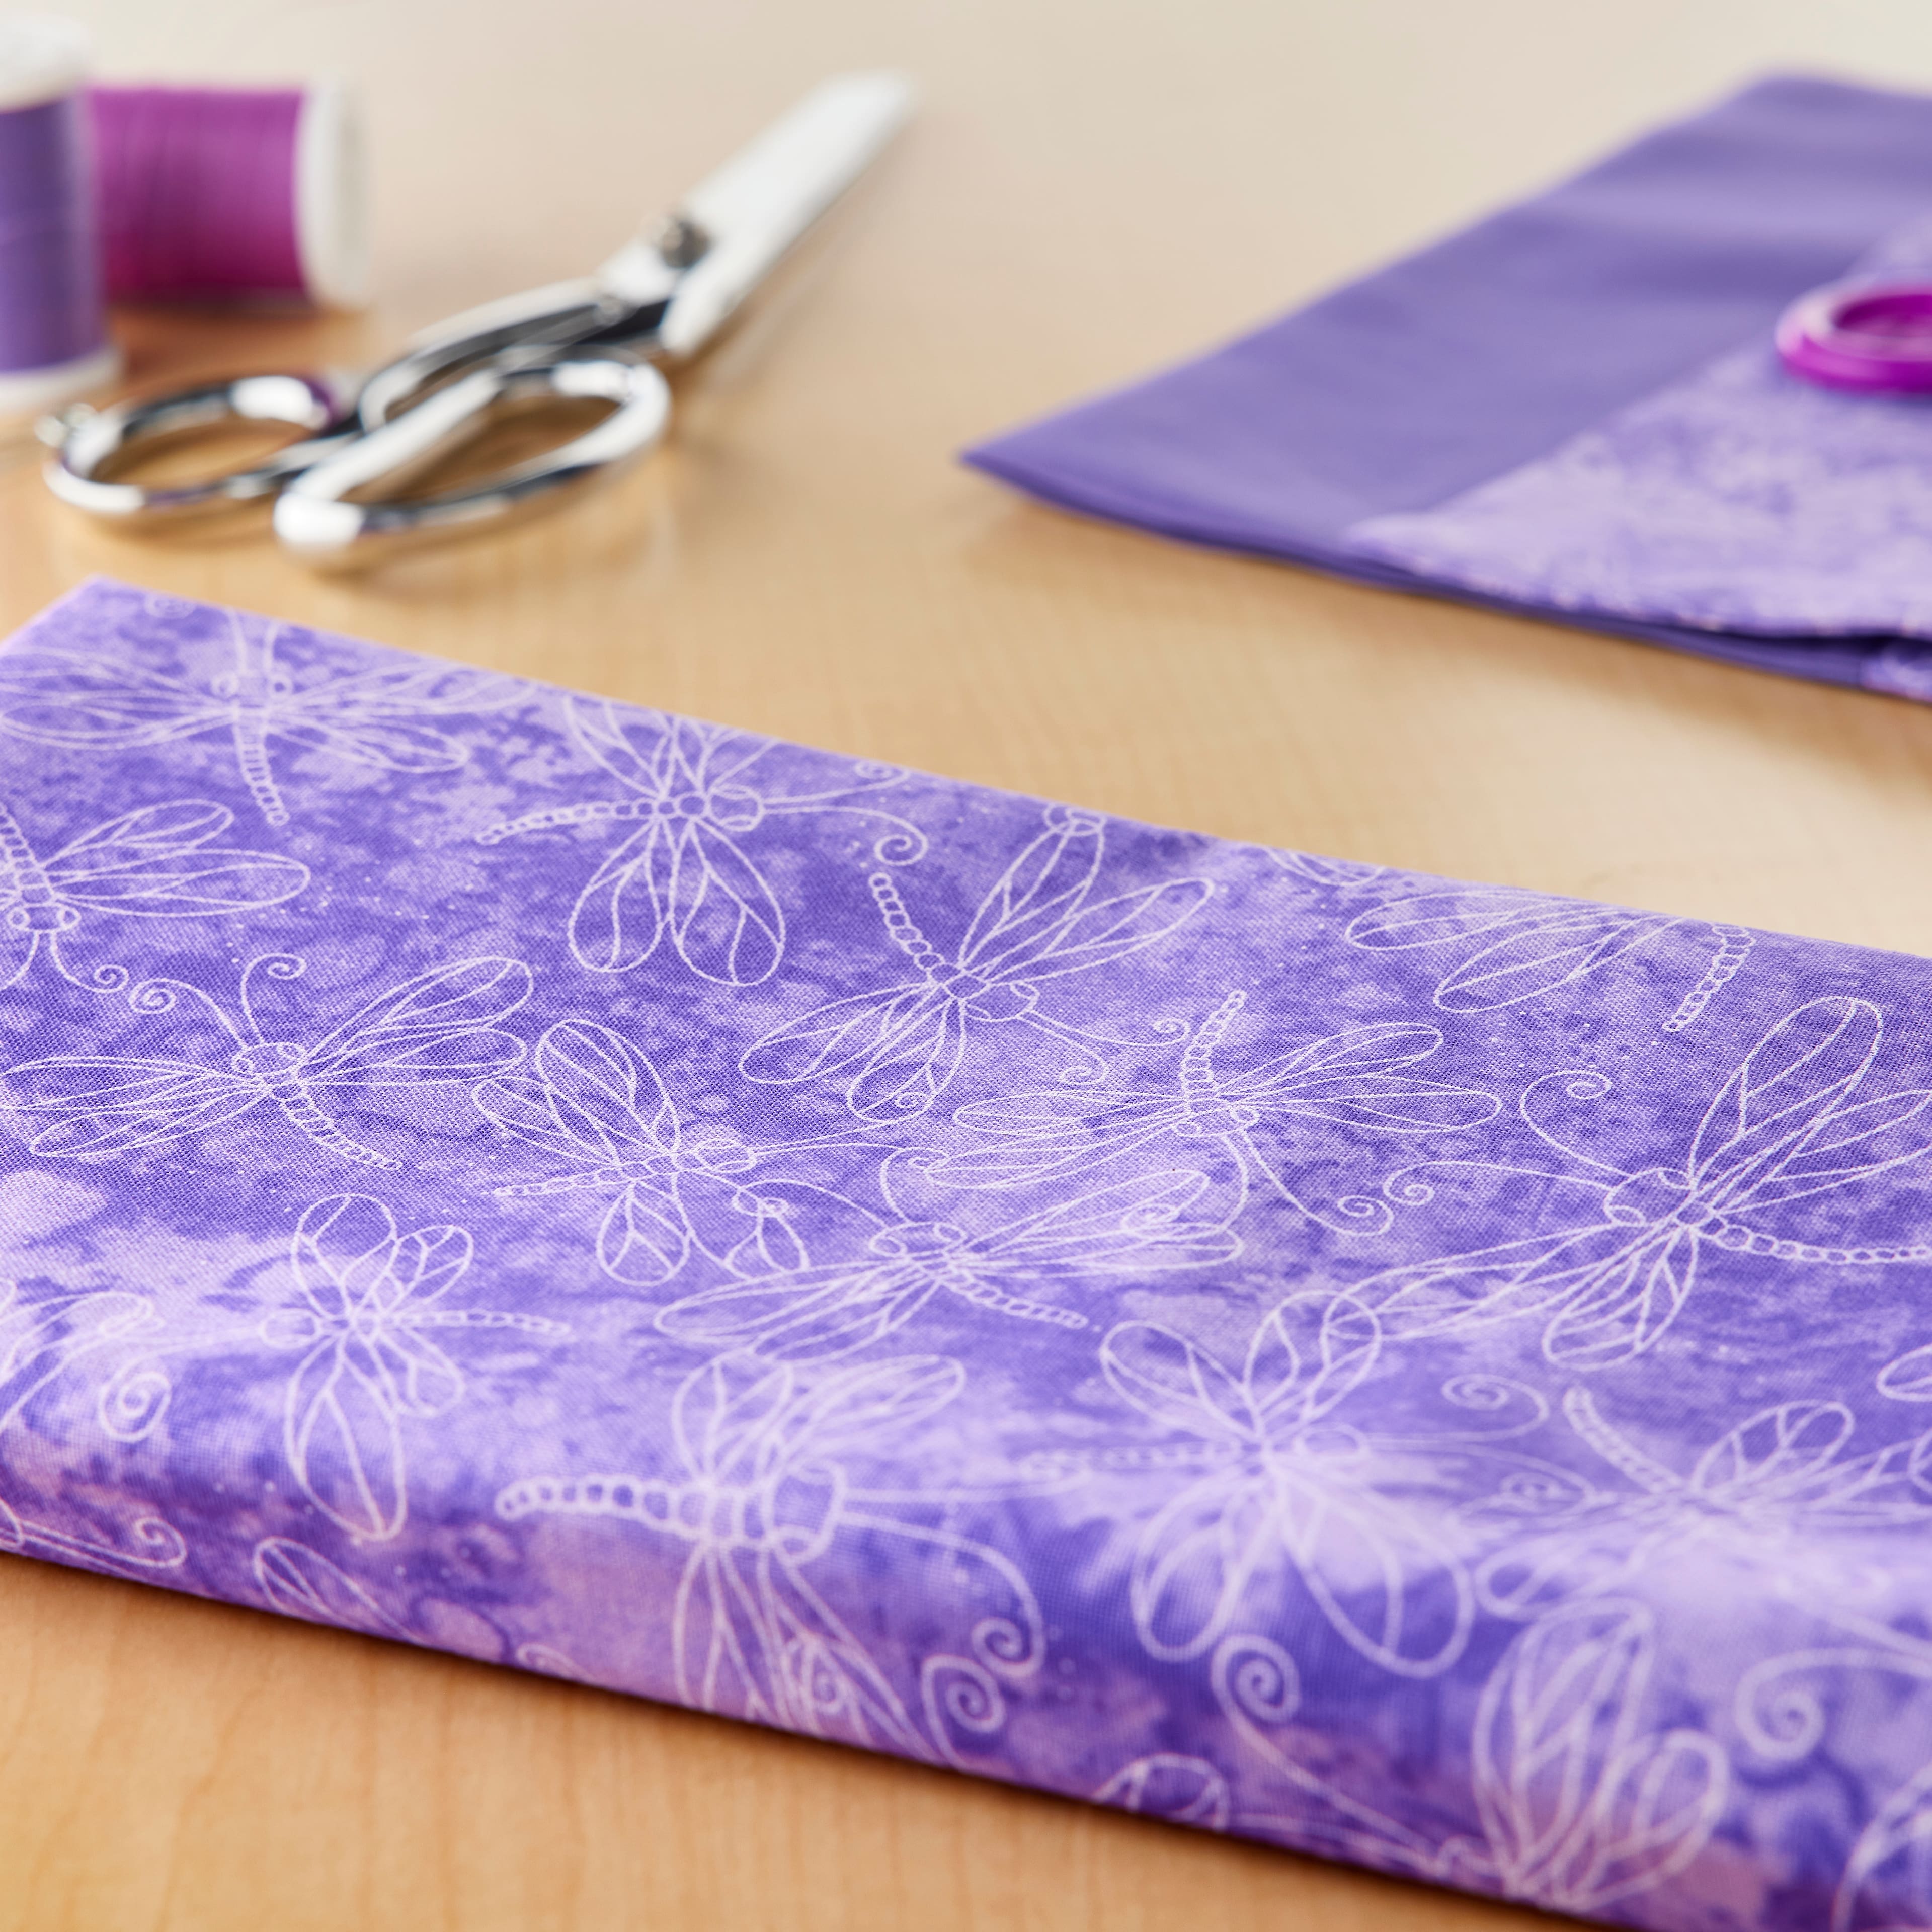 Lavender Sundrenched Dragonfly Cotton Fabric